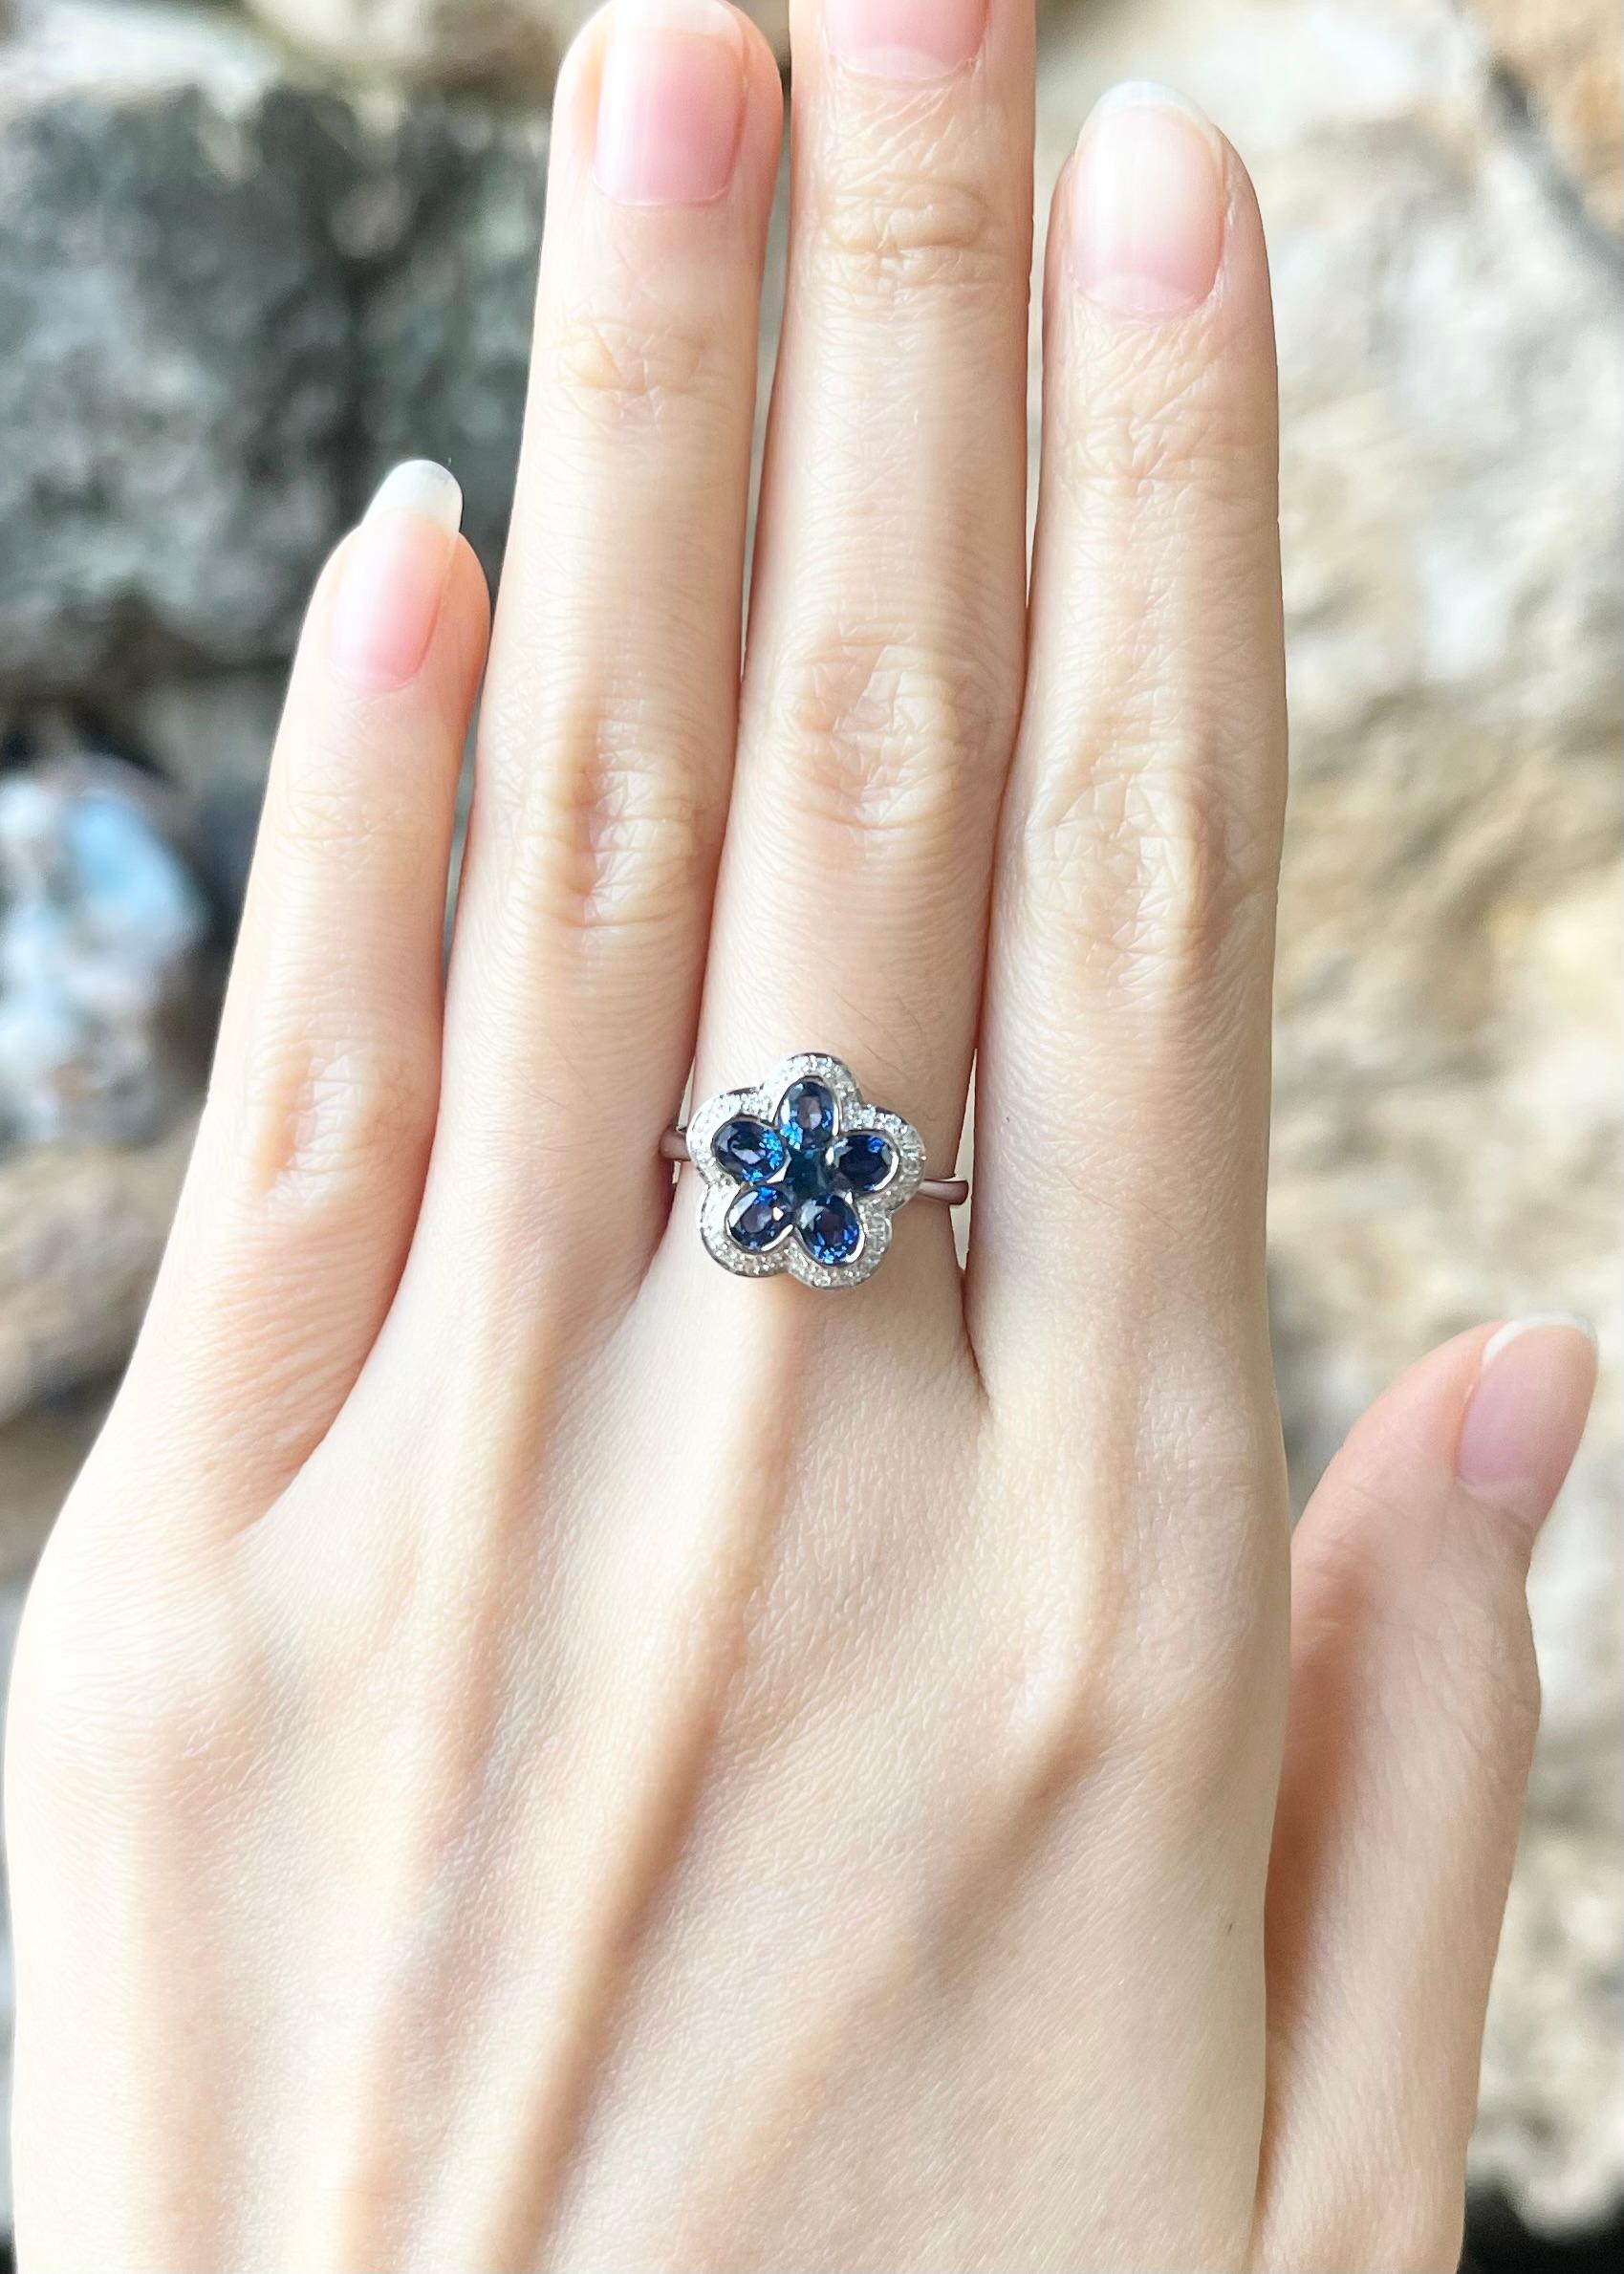 Blue Sapphire 1.45 carats with Diamond 0.12 carats Ring set in 18K White Gold Settings

Width:  1.3 cm 
Length: 1.3 cm
Ring Size: 52
Total Weight: 5.22 grams

